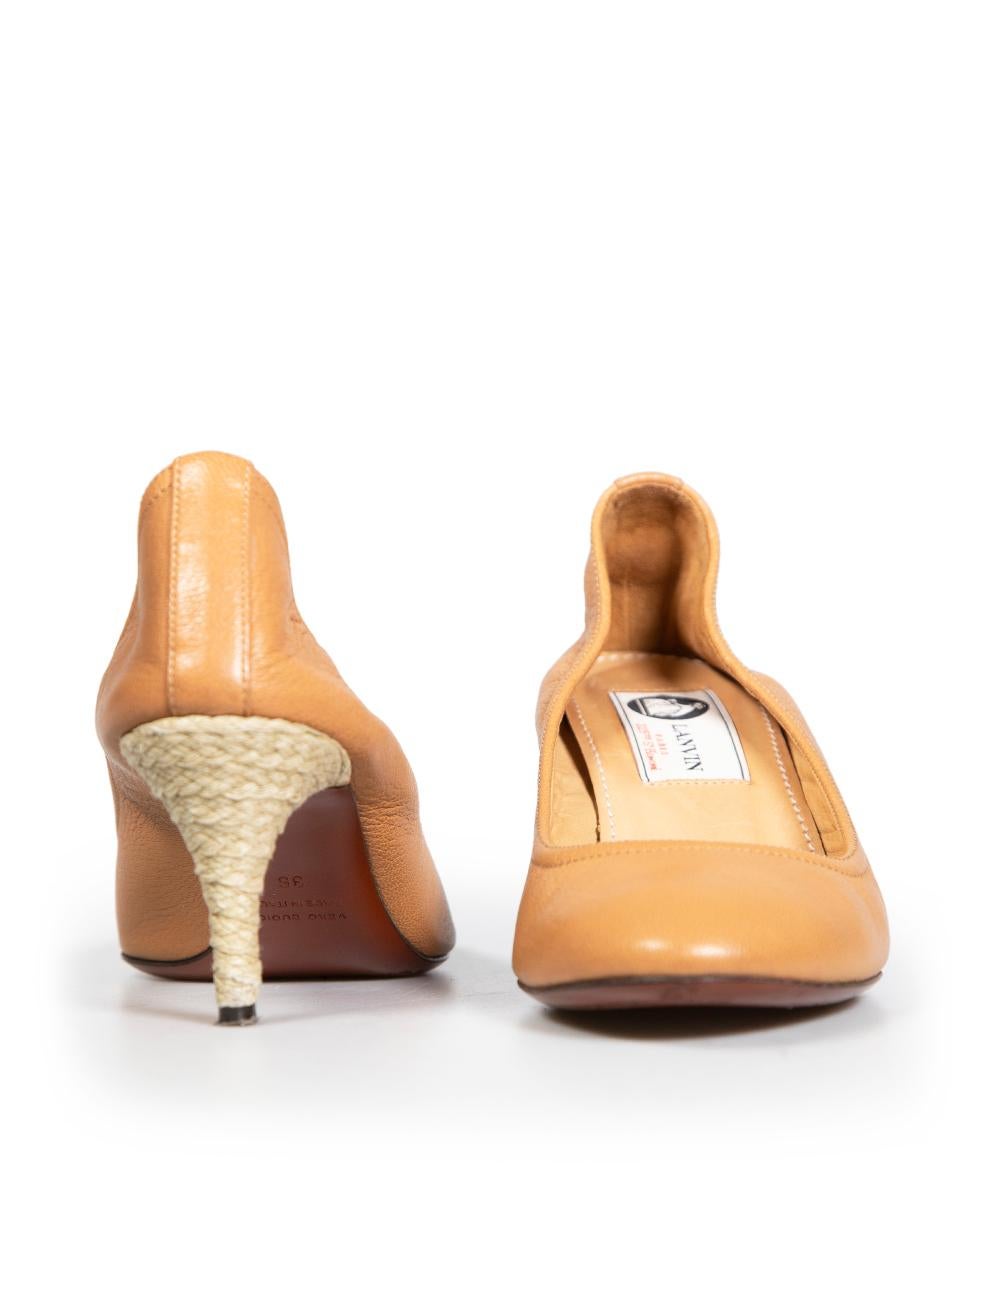 Lanvin Camel Leather Espadrilles Heel Pumps Size IT 36 In Good Condition For Sale In London, GB